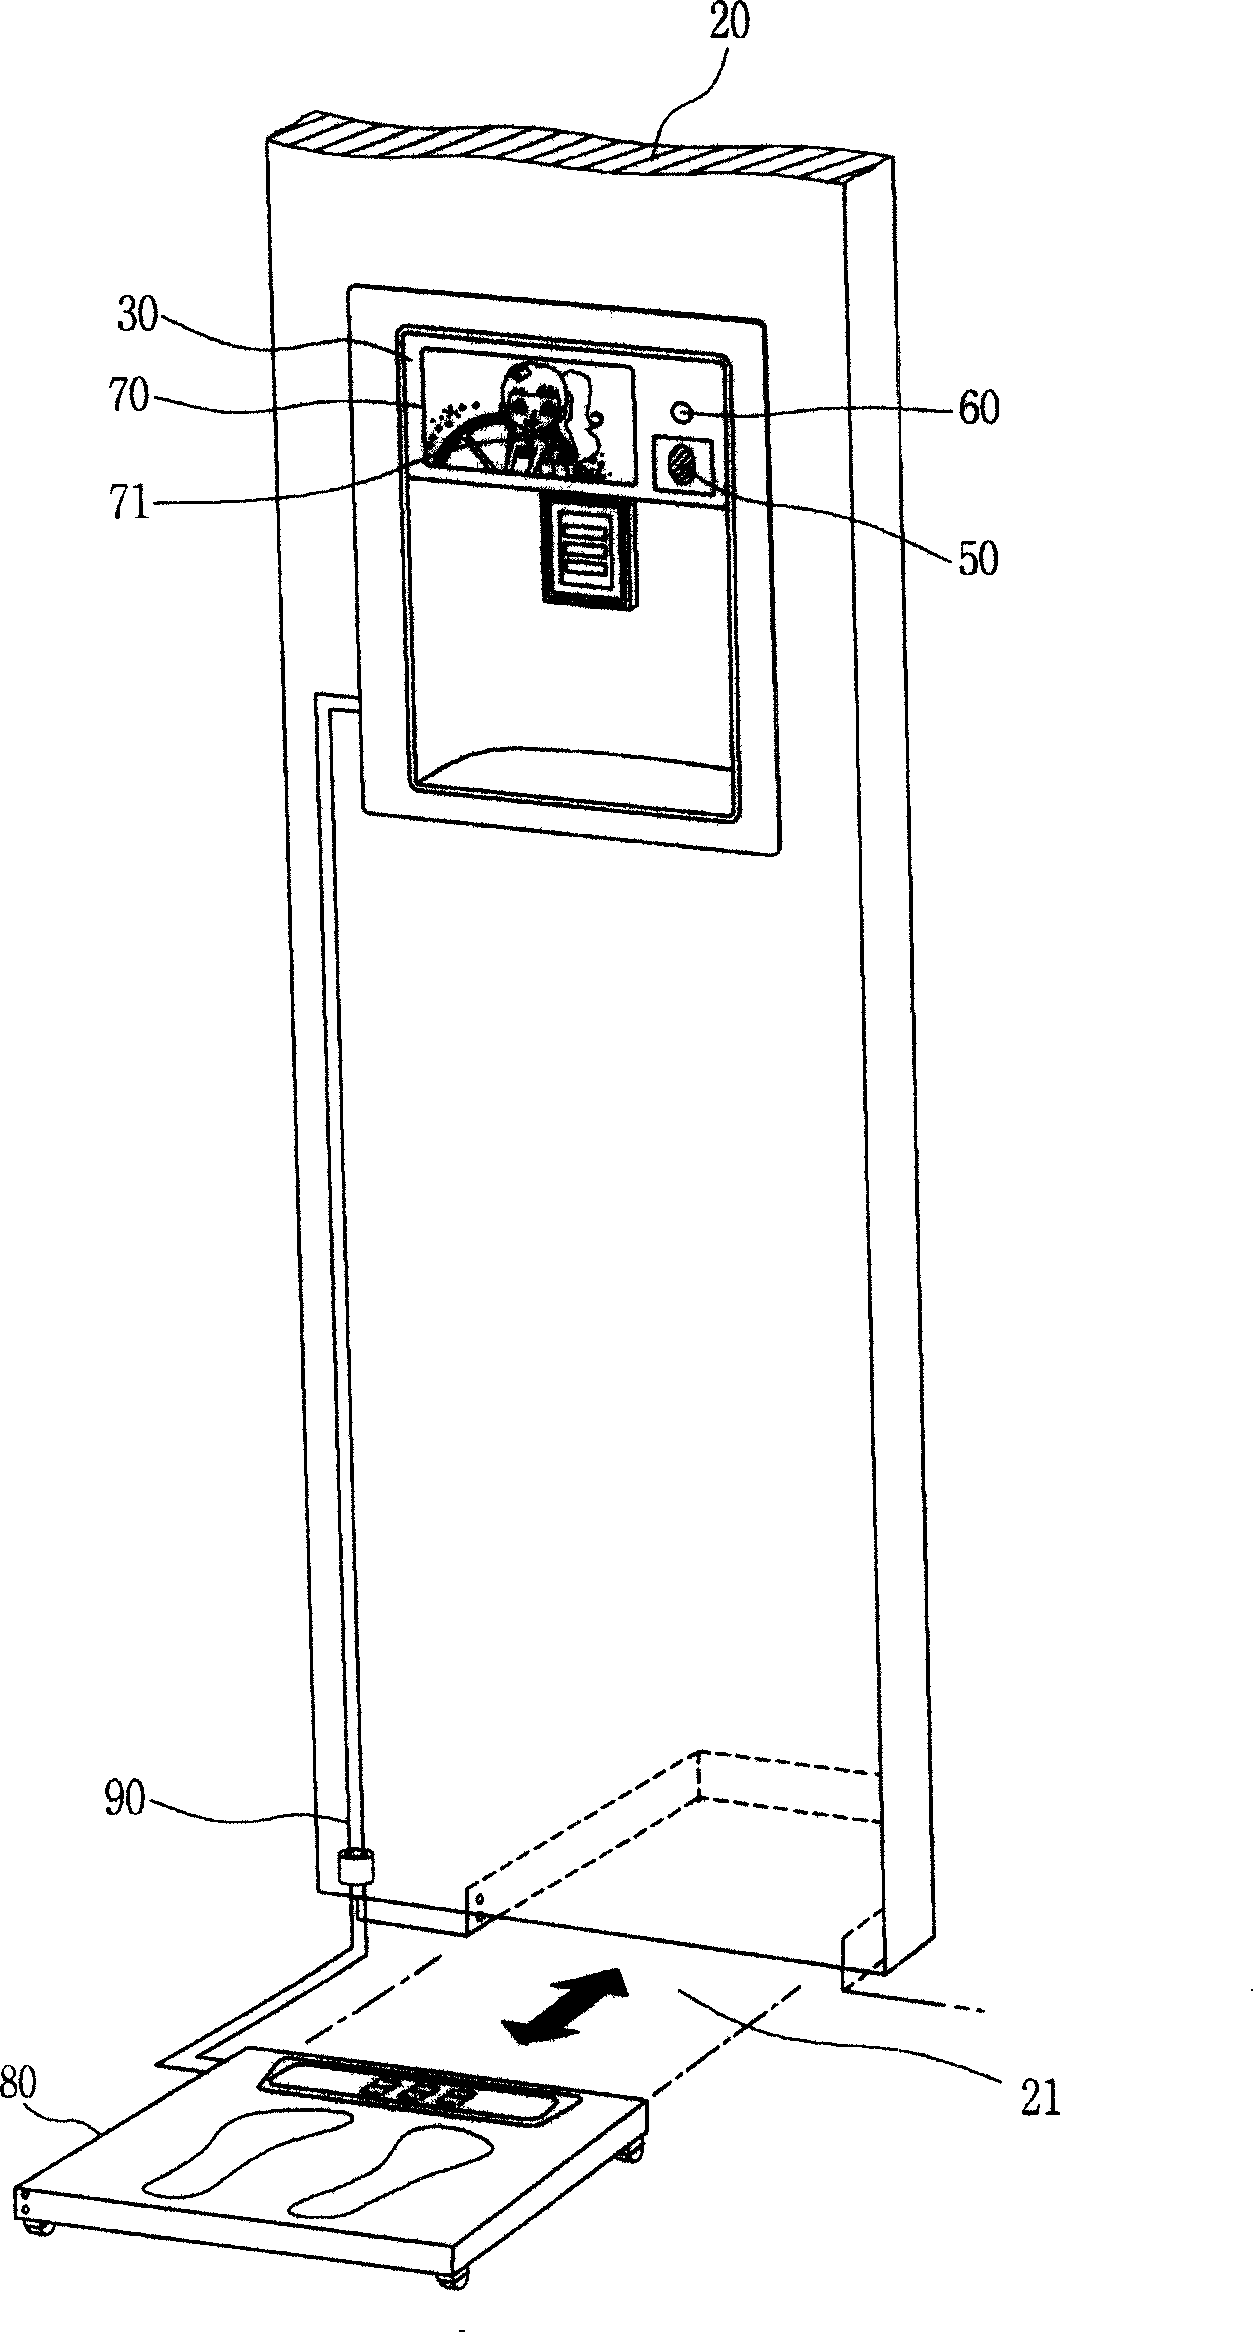 Method for managing weight of refrigerator by utilizing weight management device